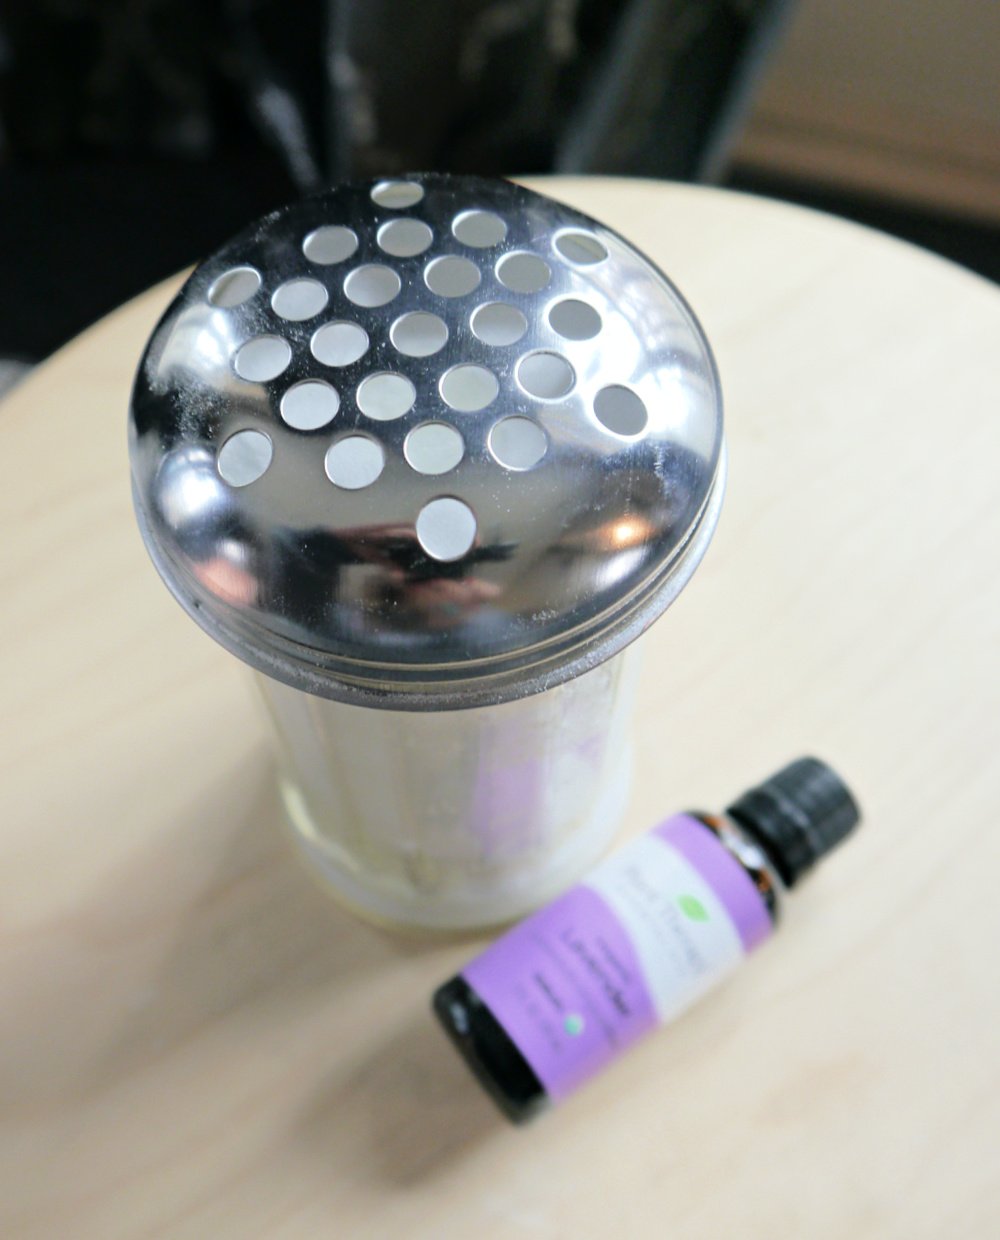 Shaker jar with baking soda and lavender essential oil on a table.